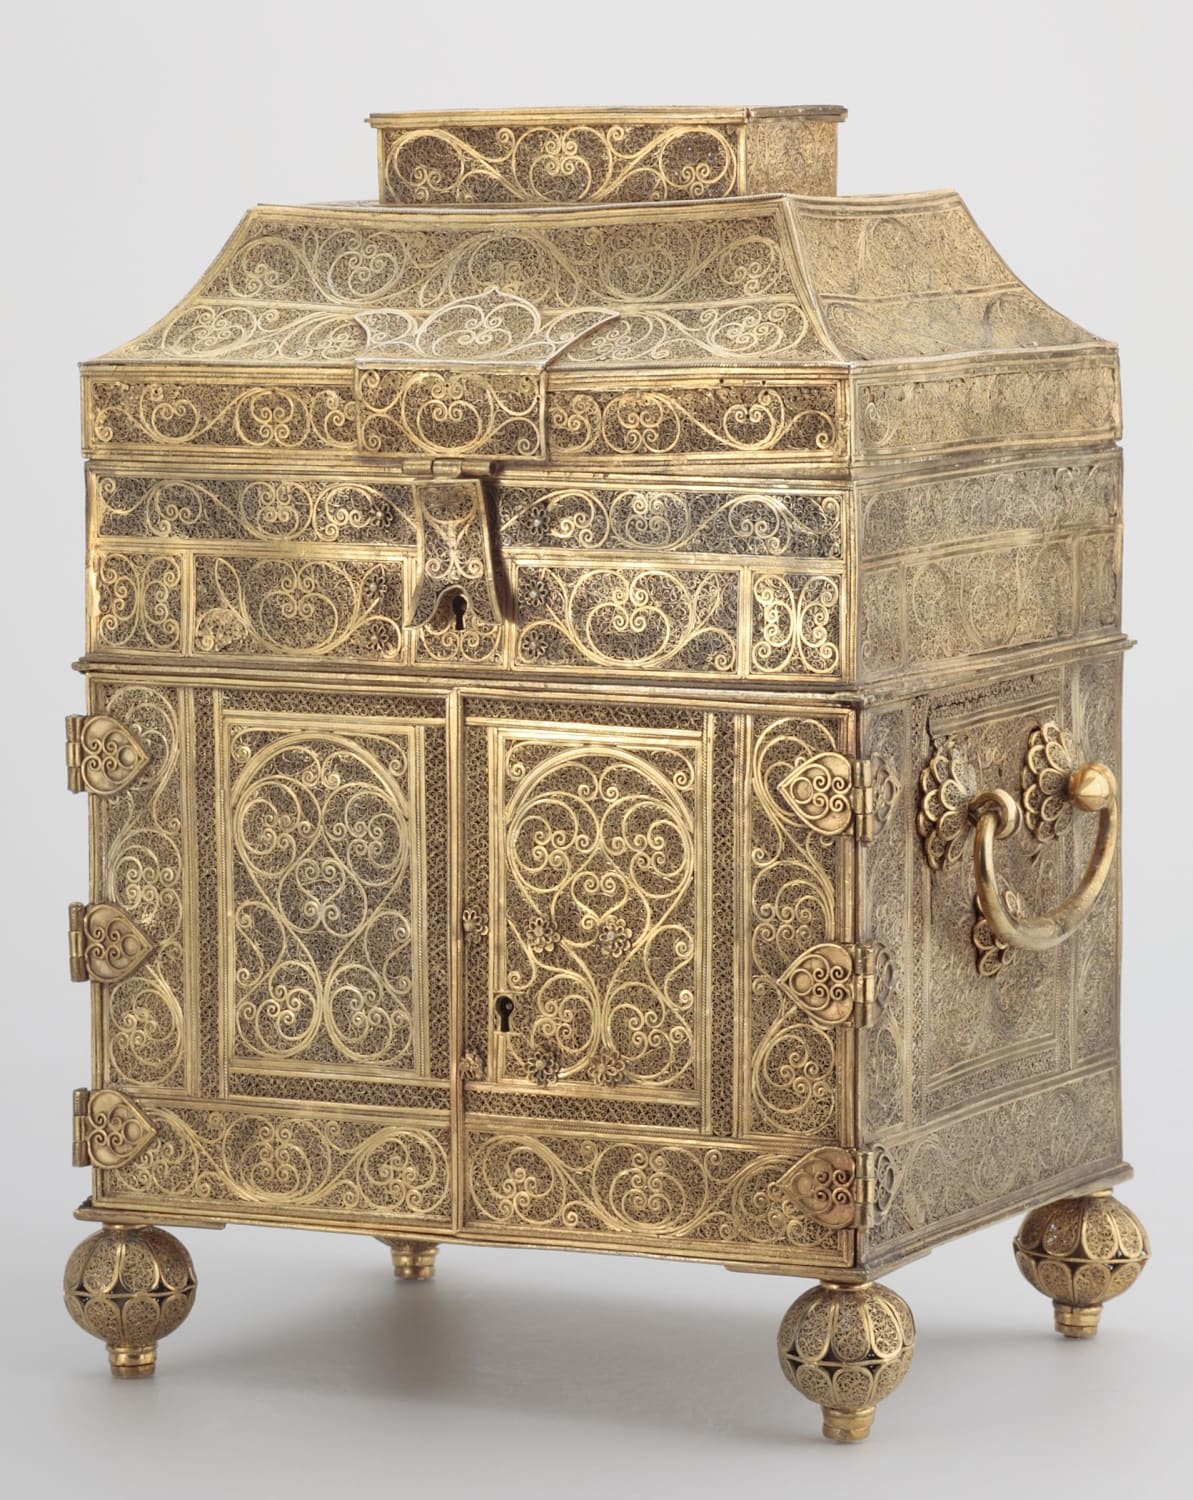 A silver-gilt filigree cabinet from Goa, India. 17th century CE, now part of the Khalili Collection of Islamic Art